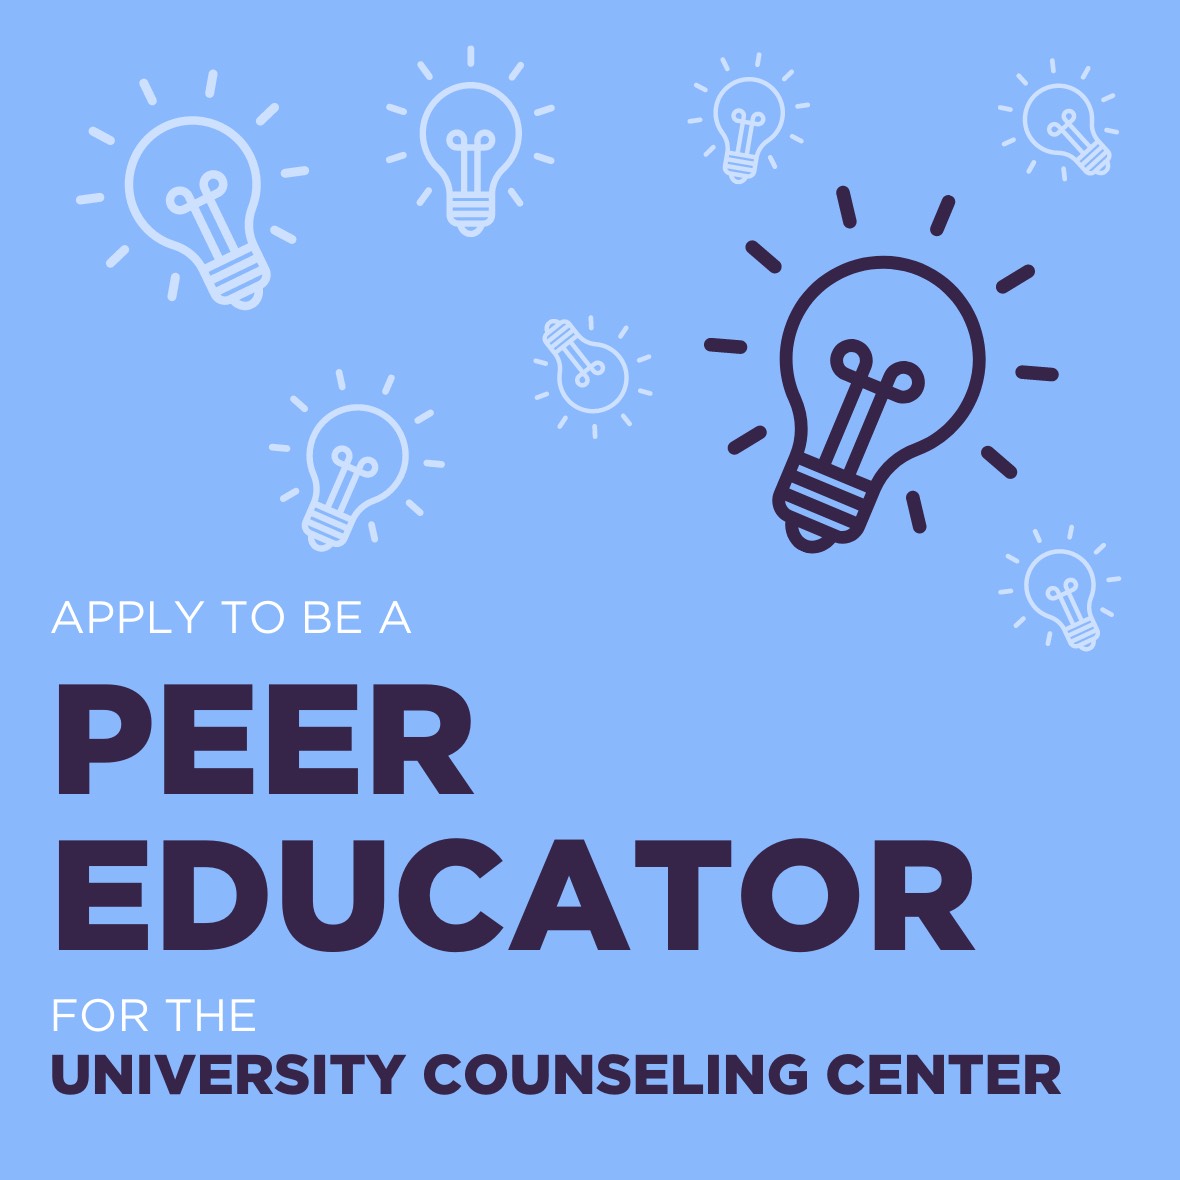 Apply to be a Peer Educator for the University Counseling Center